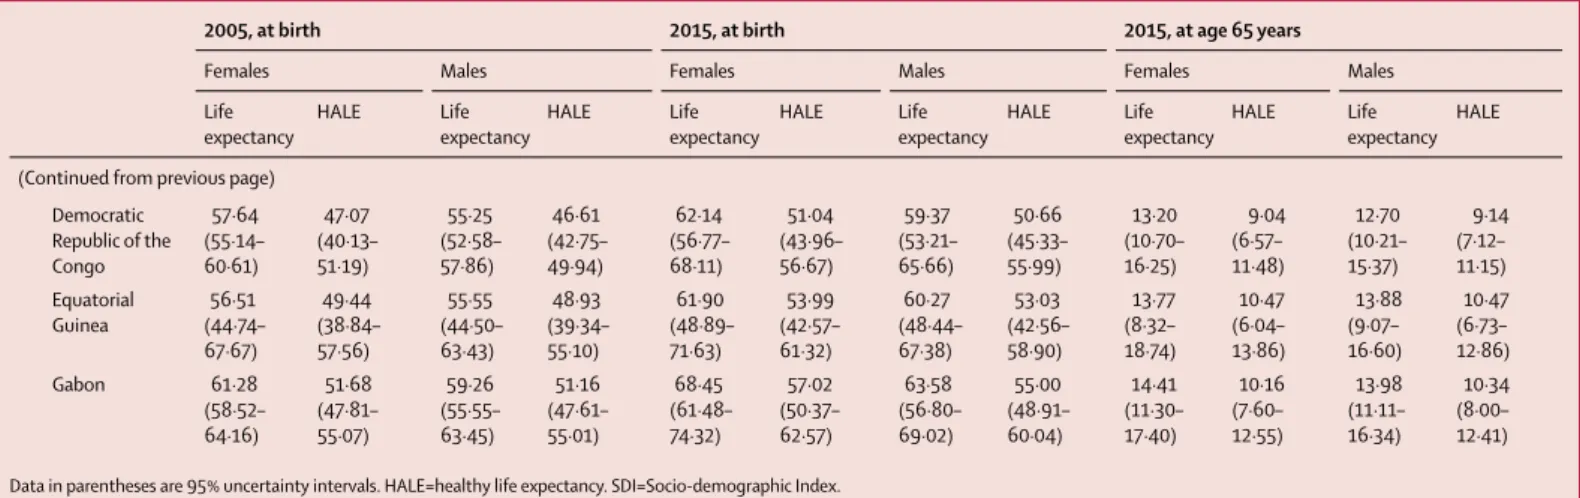 Table 2: Global, regional, and national or territory life expectancy and HALE at birth, by sex, in 2005 and 2015, and HALE at age 65, by sex, in 2015